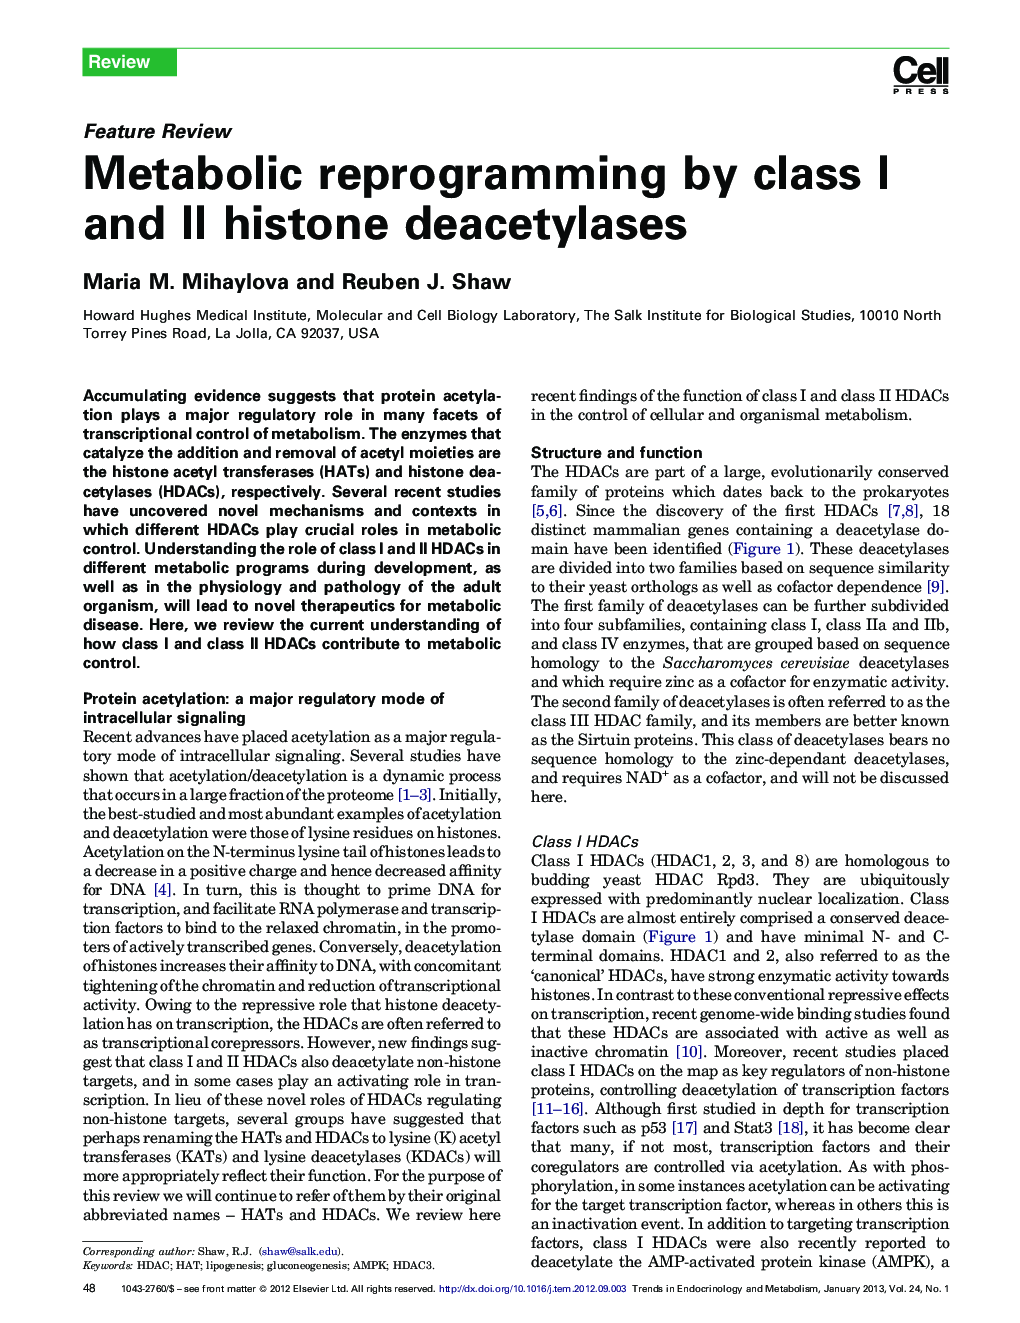 Metabolic reprogramming by class I and II histone deacetylases